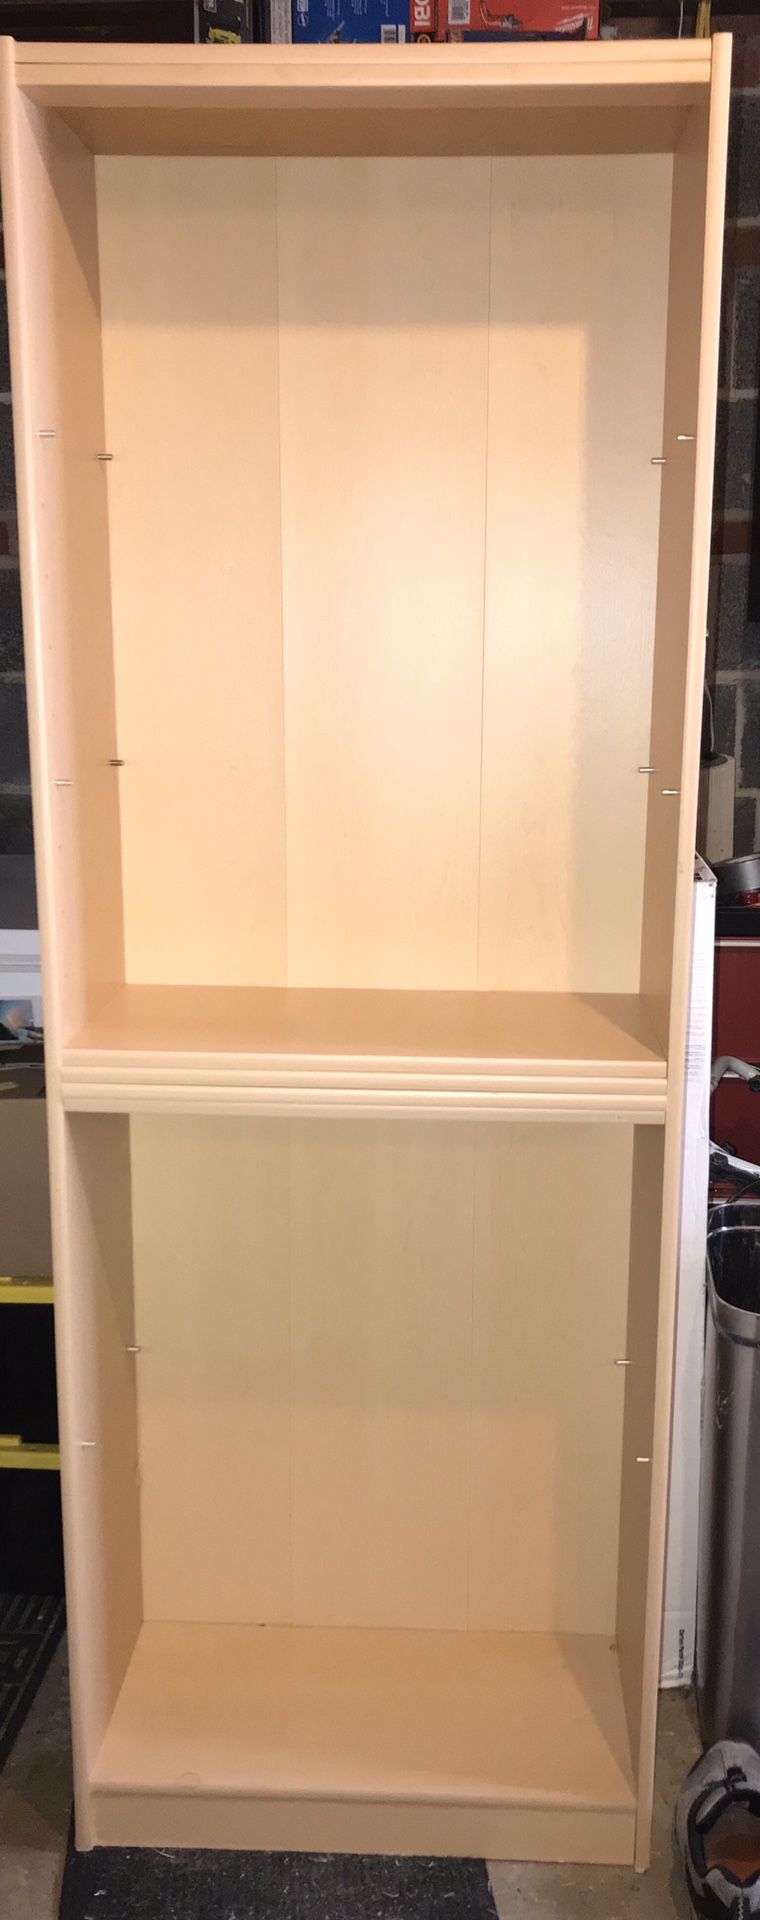 Used Tall Bookshelf with 4 shelves. Great Condition.